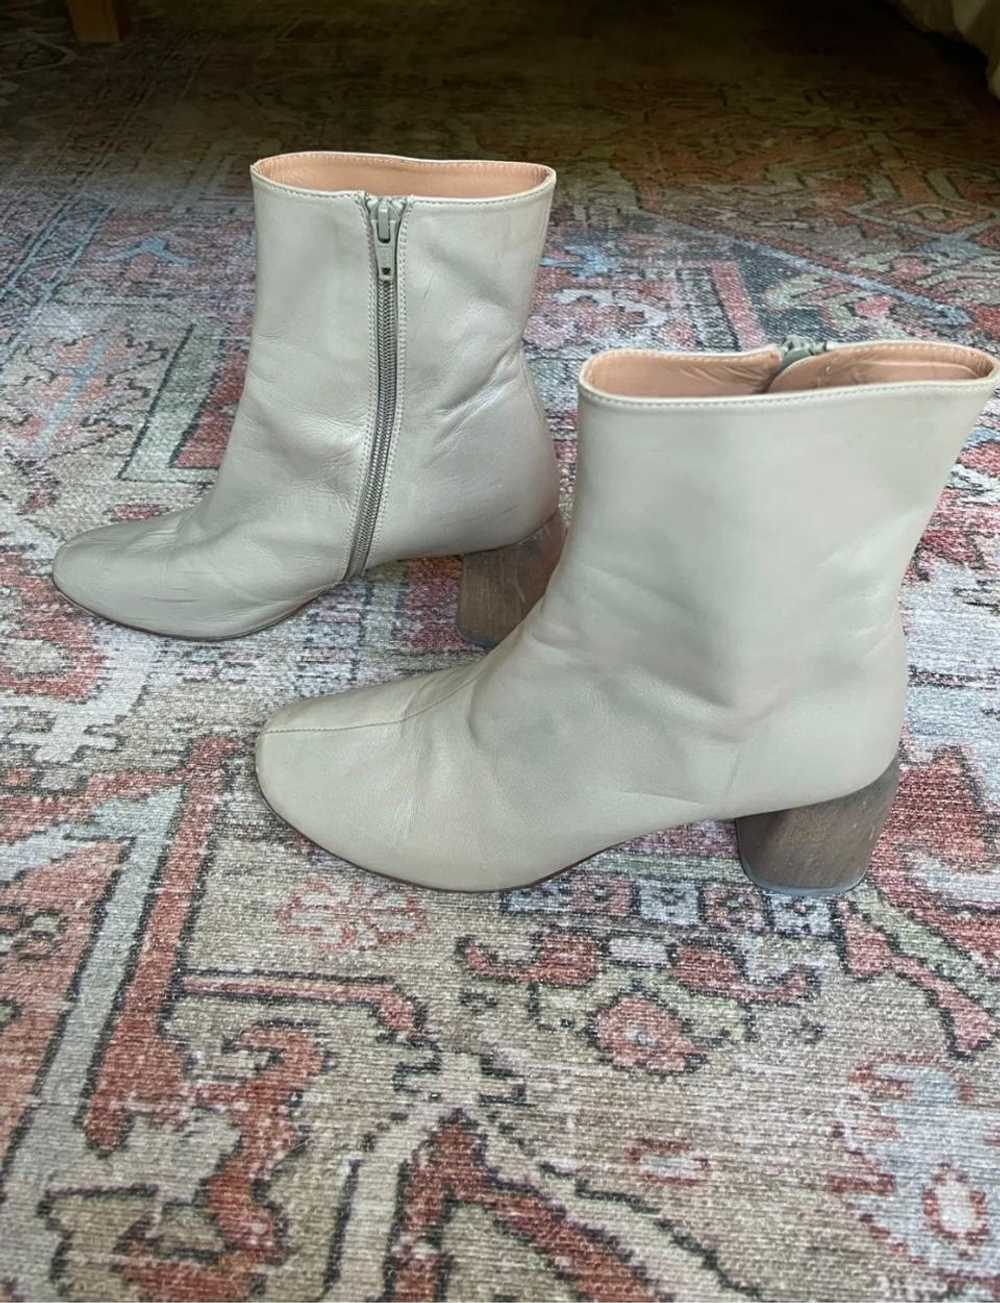 LOQ Georgia boot (40) | Used, Secondhand, Resell - image 4